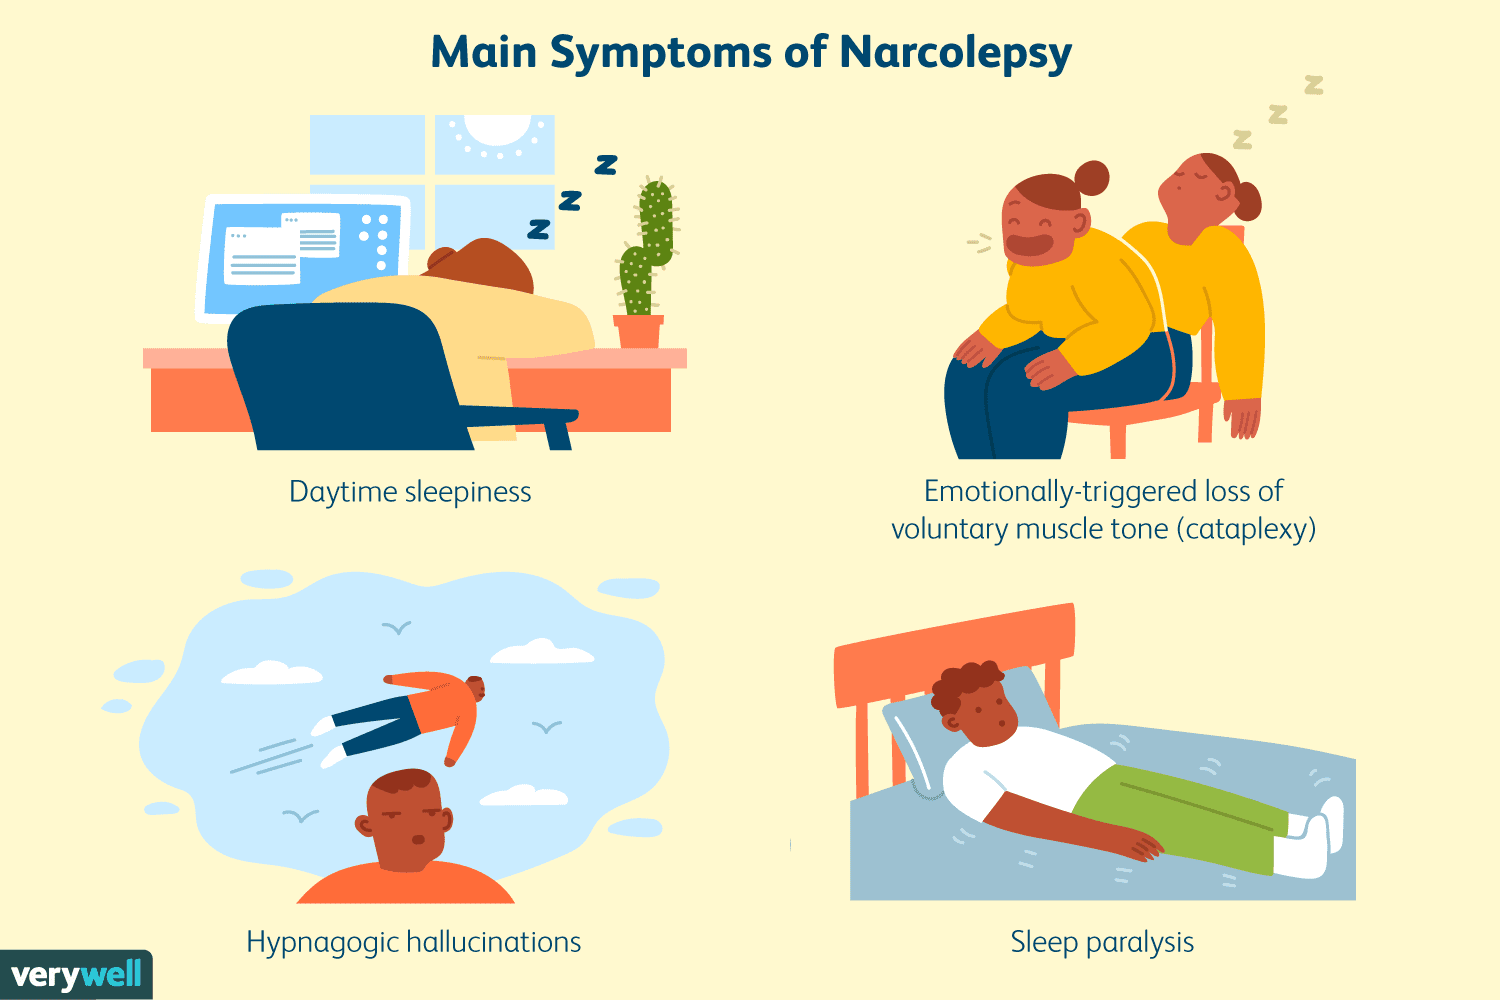 What is cataplexy, and how is it related to narcolepsy?